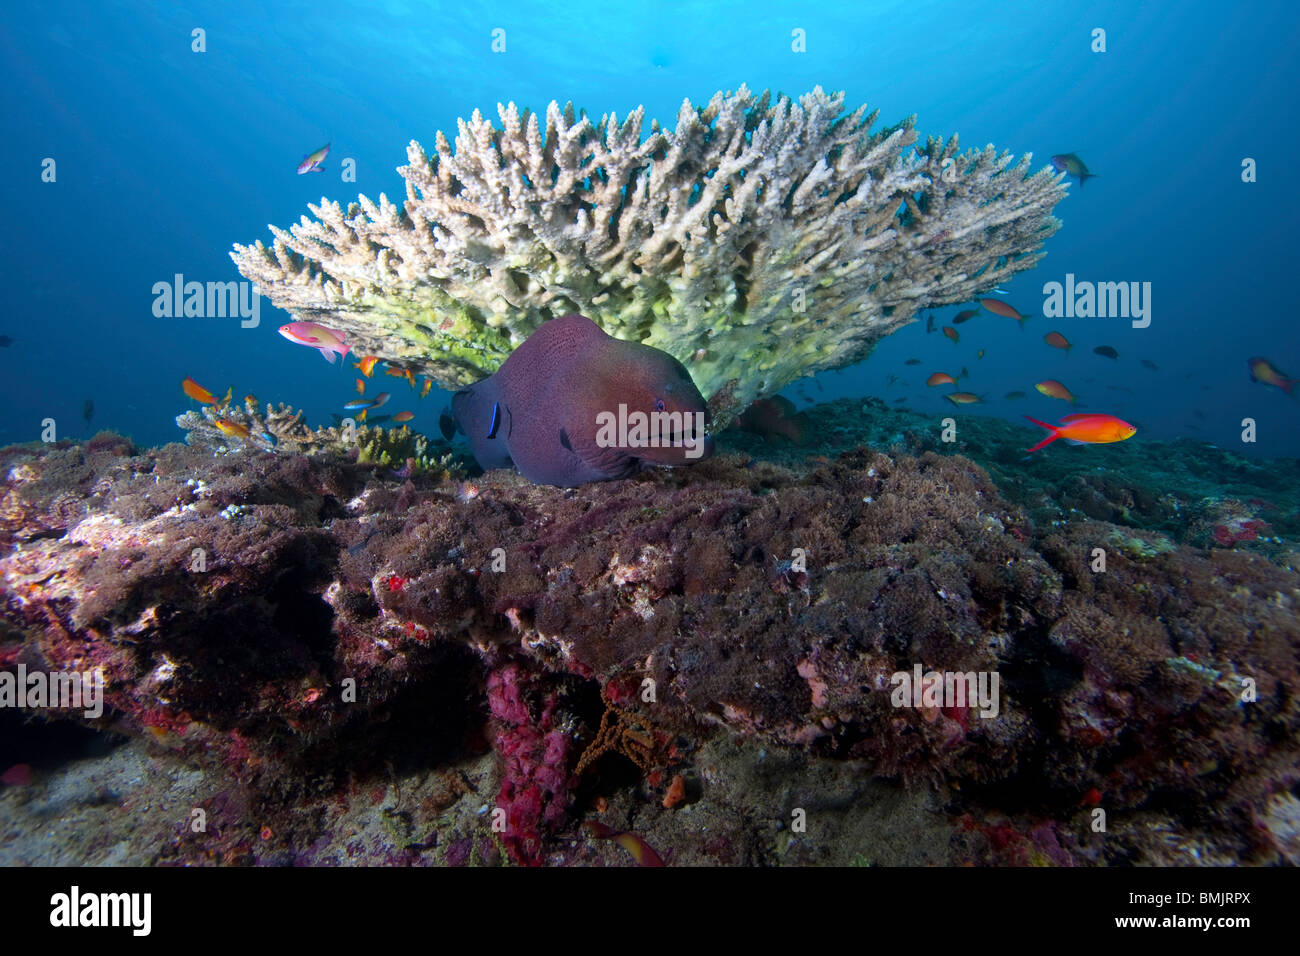 Giant Moray eel (Gymnothorax javanicus) under table coral on top of reef in the Maldives Stock Photo